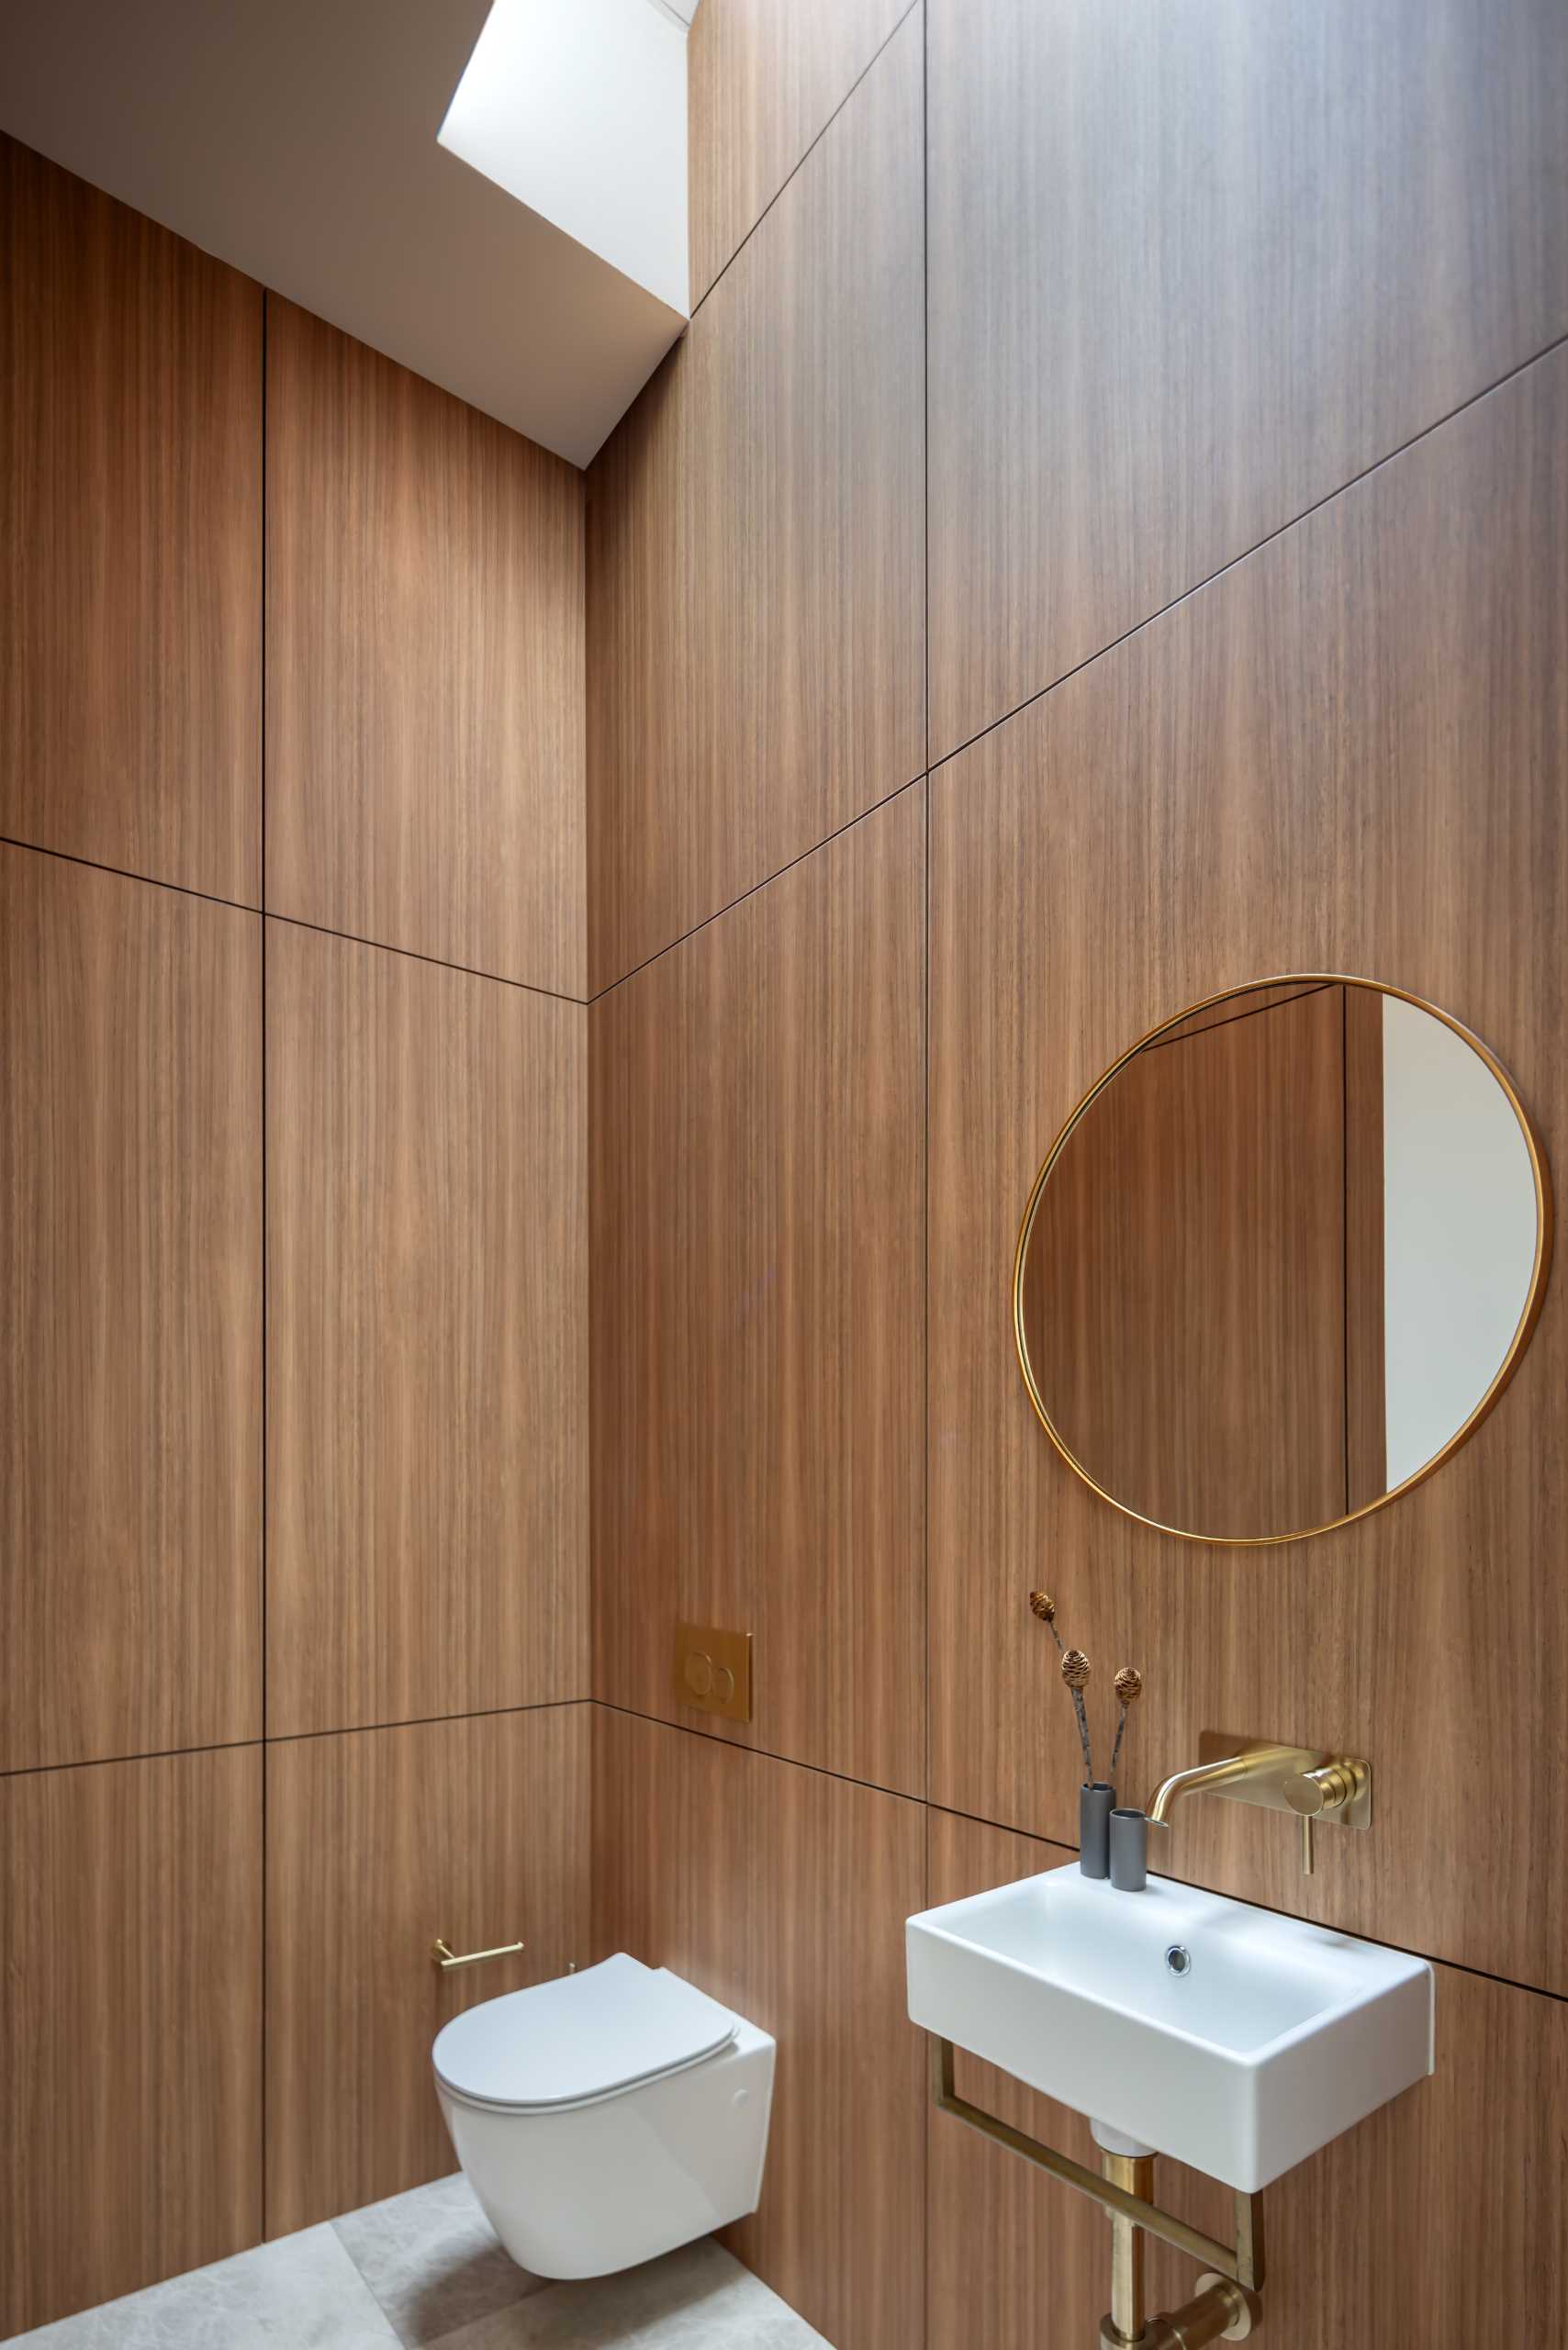 In a powder room, floor-to-ceiling wood walls are highlighted by the skylight.